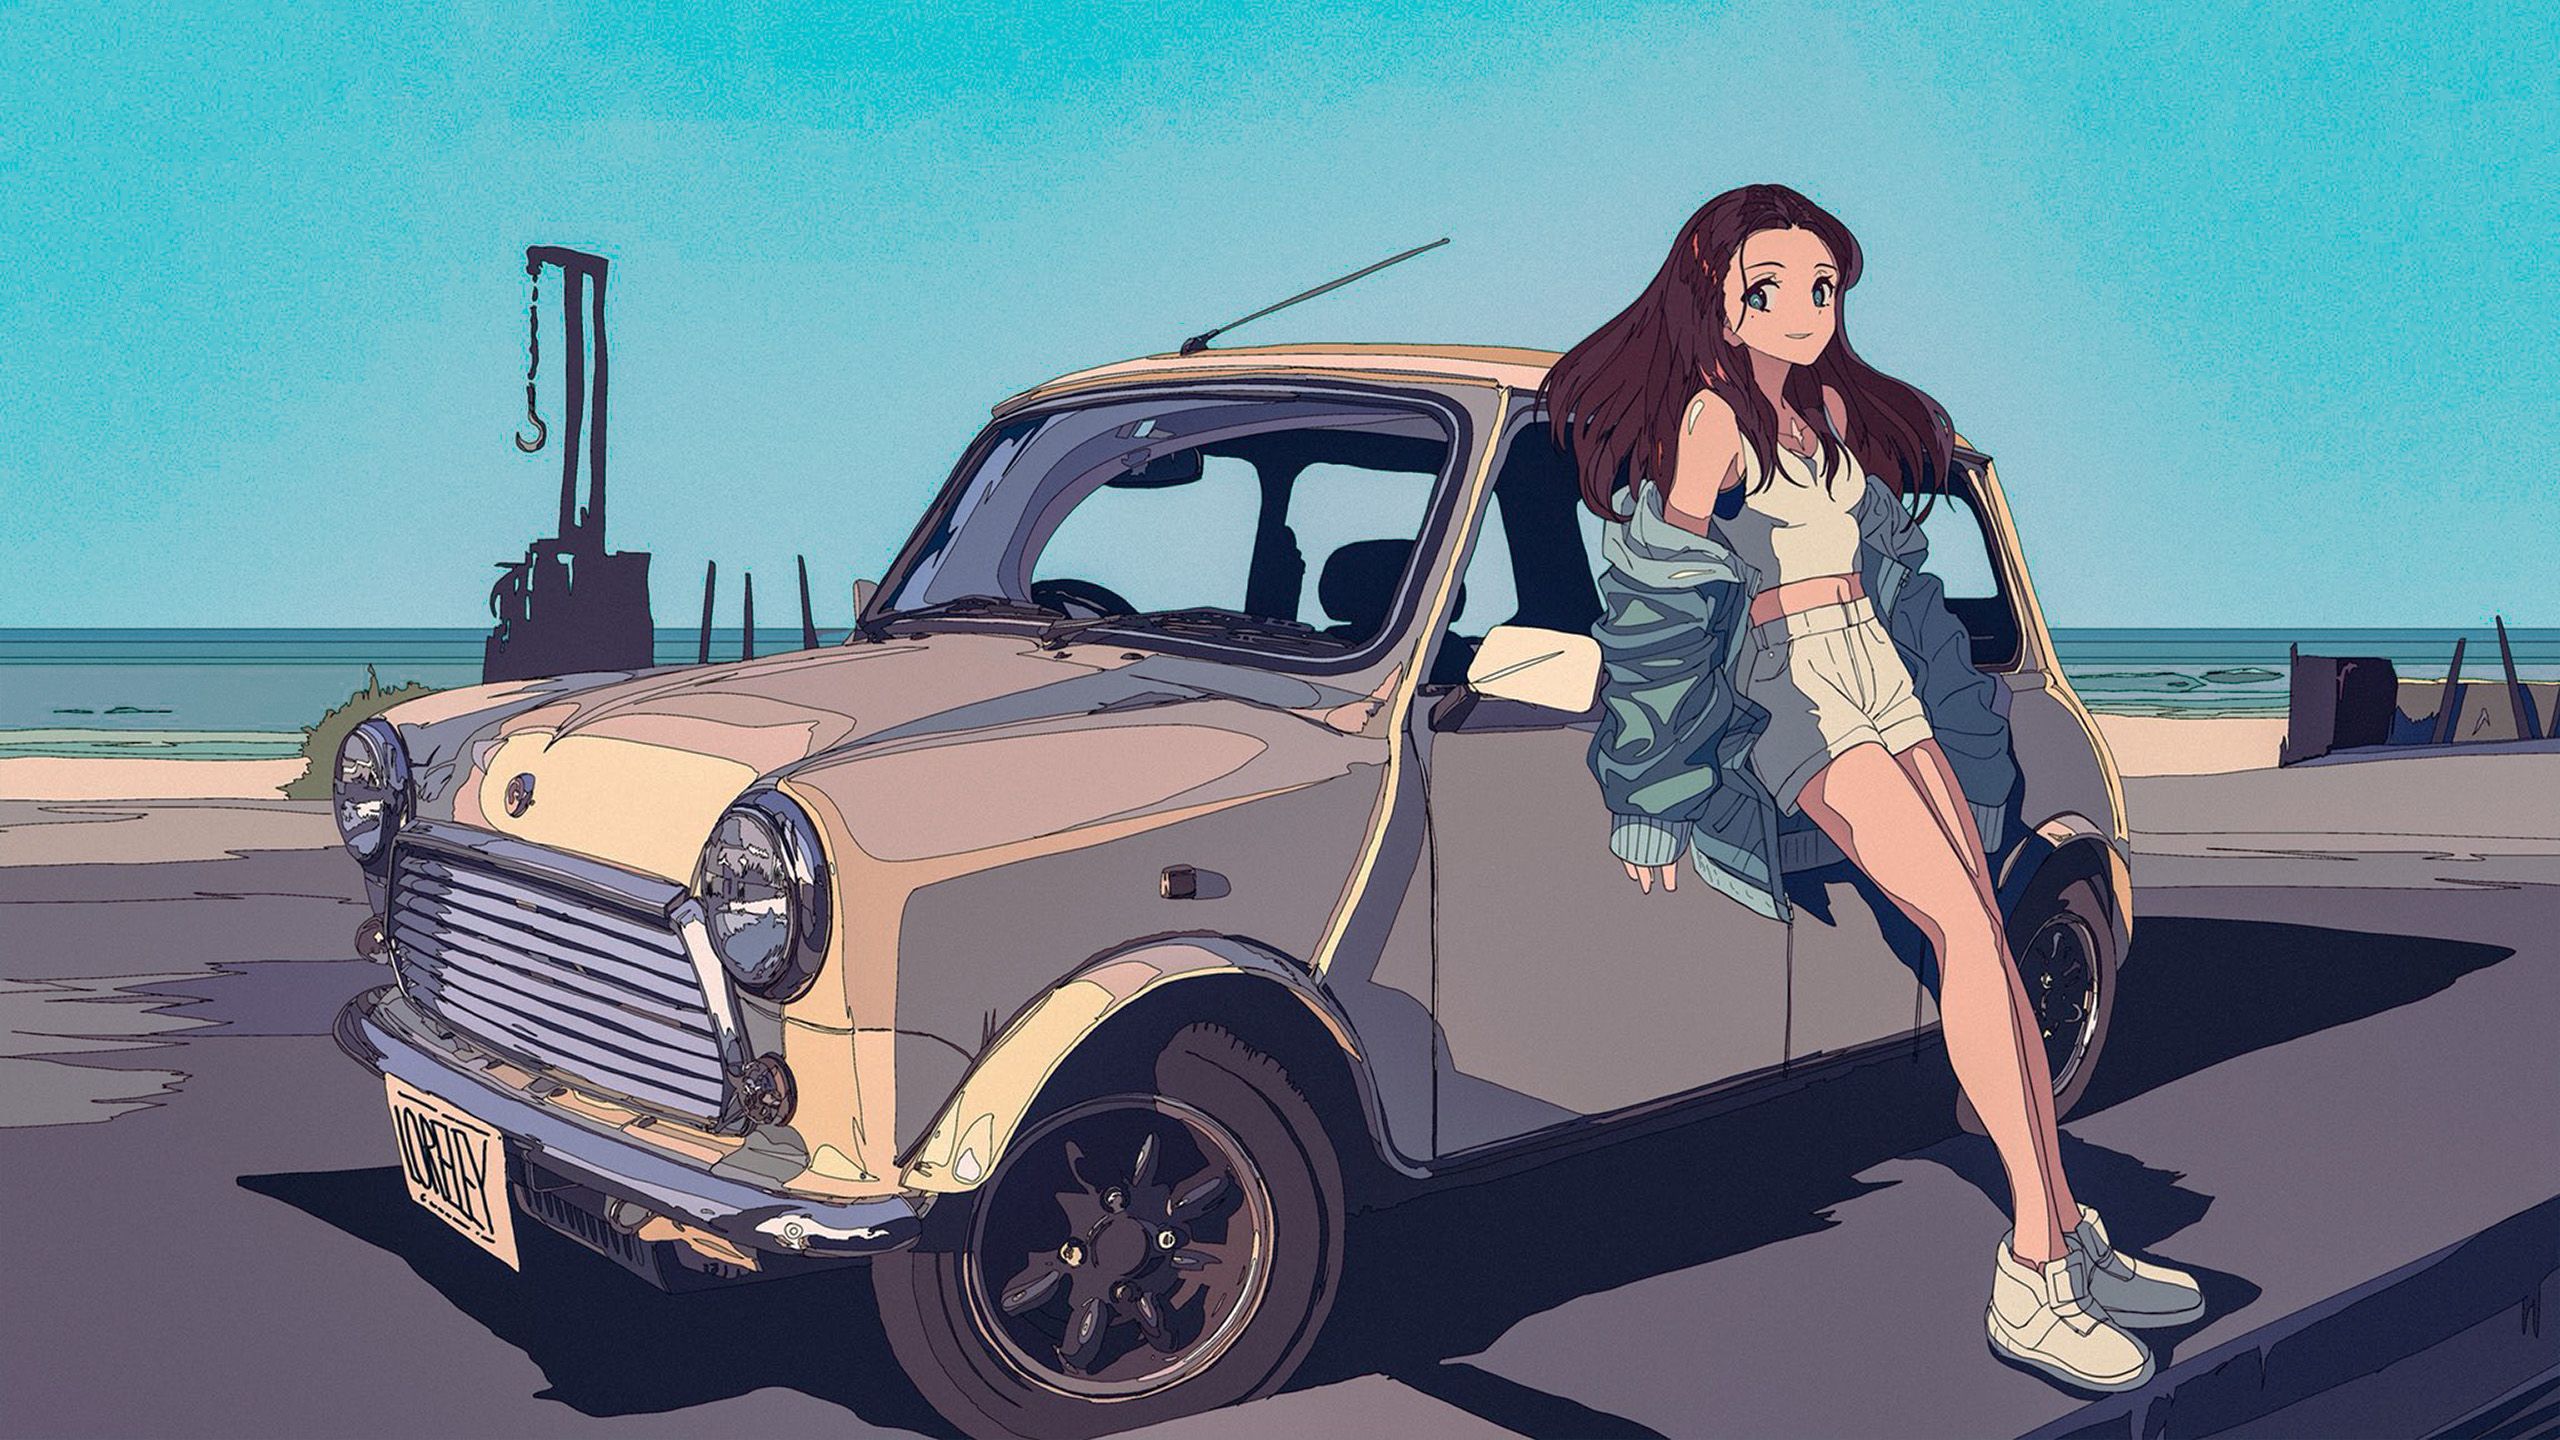 Embrace Your Inner Otaku Luxury Car Hire for an Unforgettable Anime Expo  Experience in Los Angeles